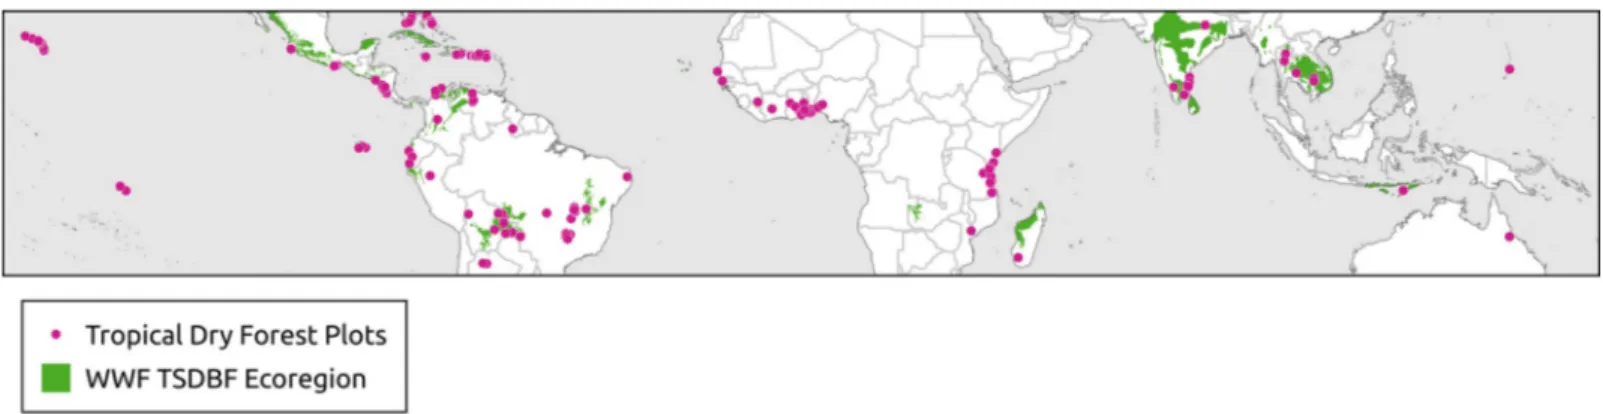 Fig 1. Distribution of 540 tropical dry forest plots and the World Wildlife Fund’s tropical and subtropical dry broadleaf forest ecoregion.